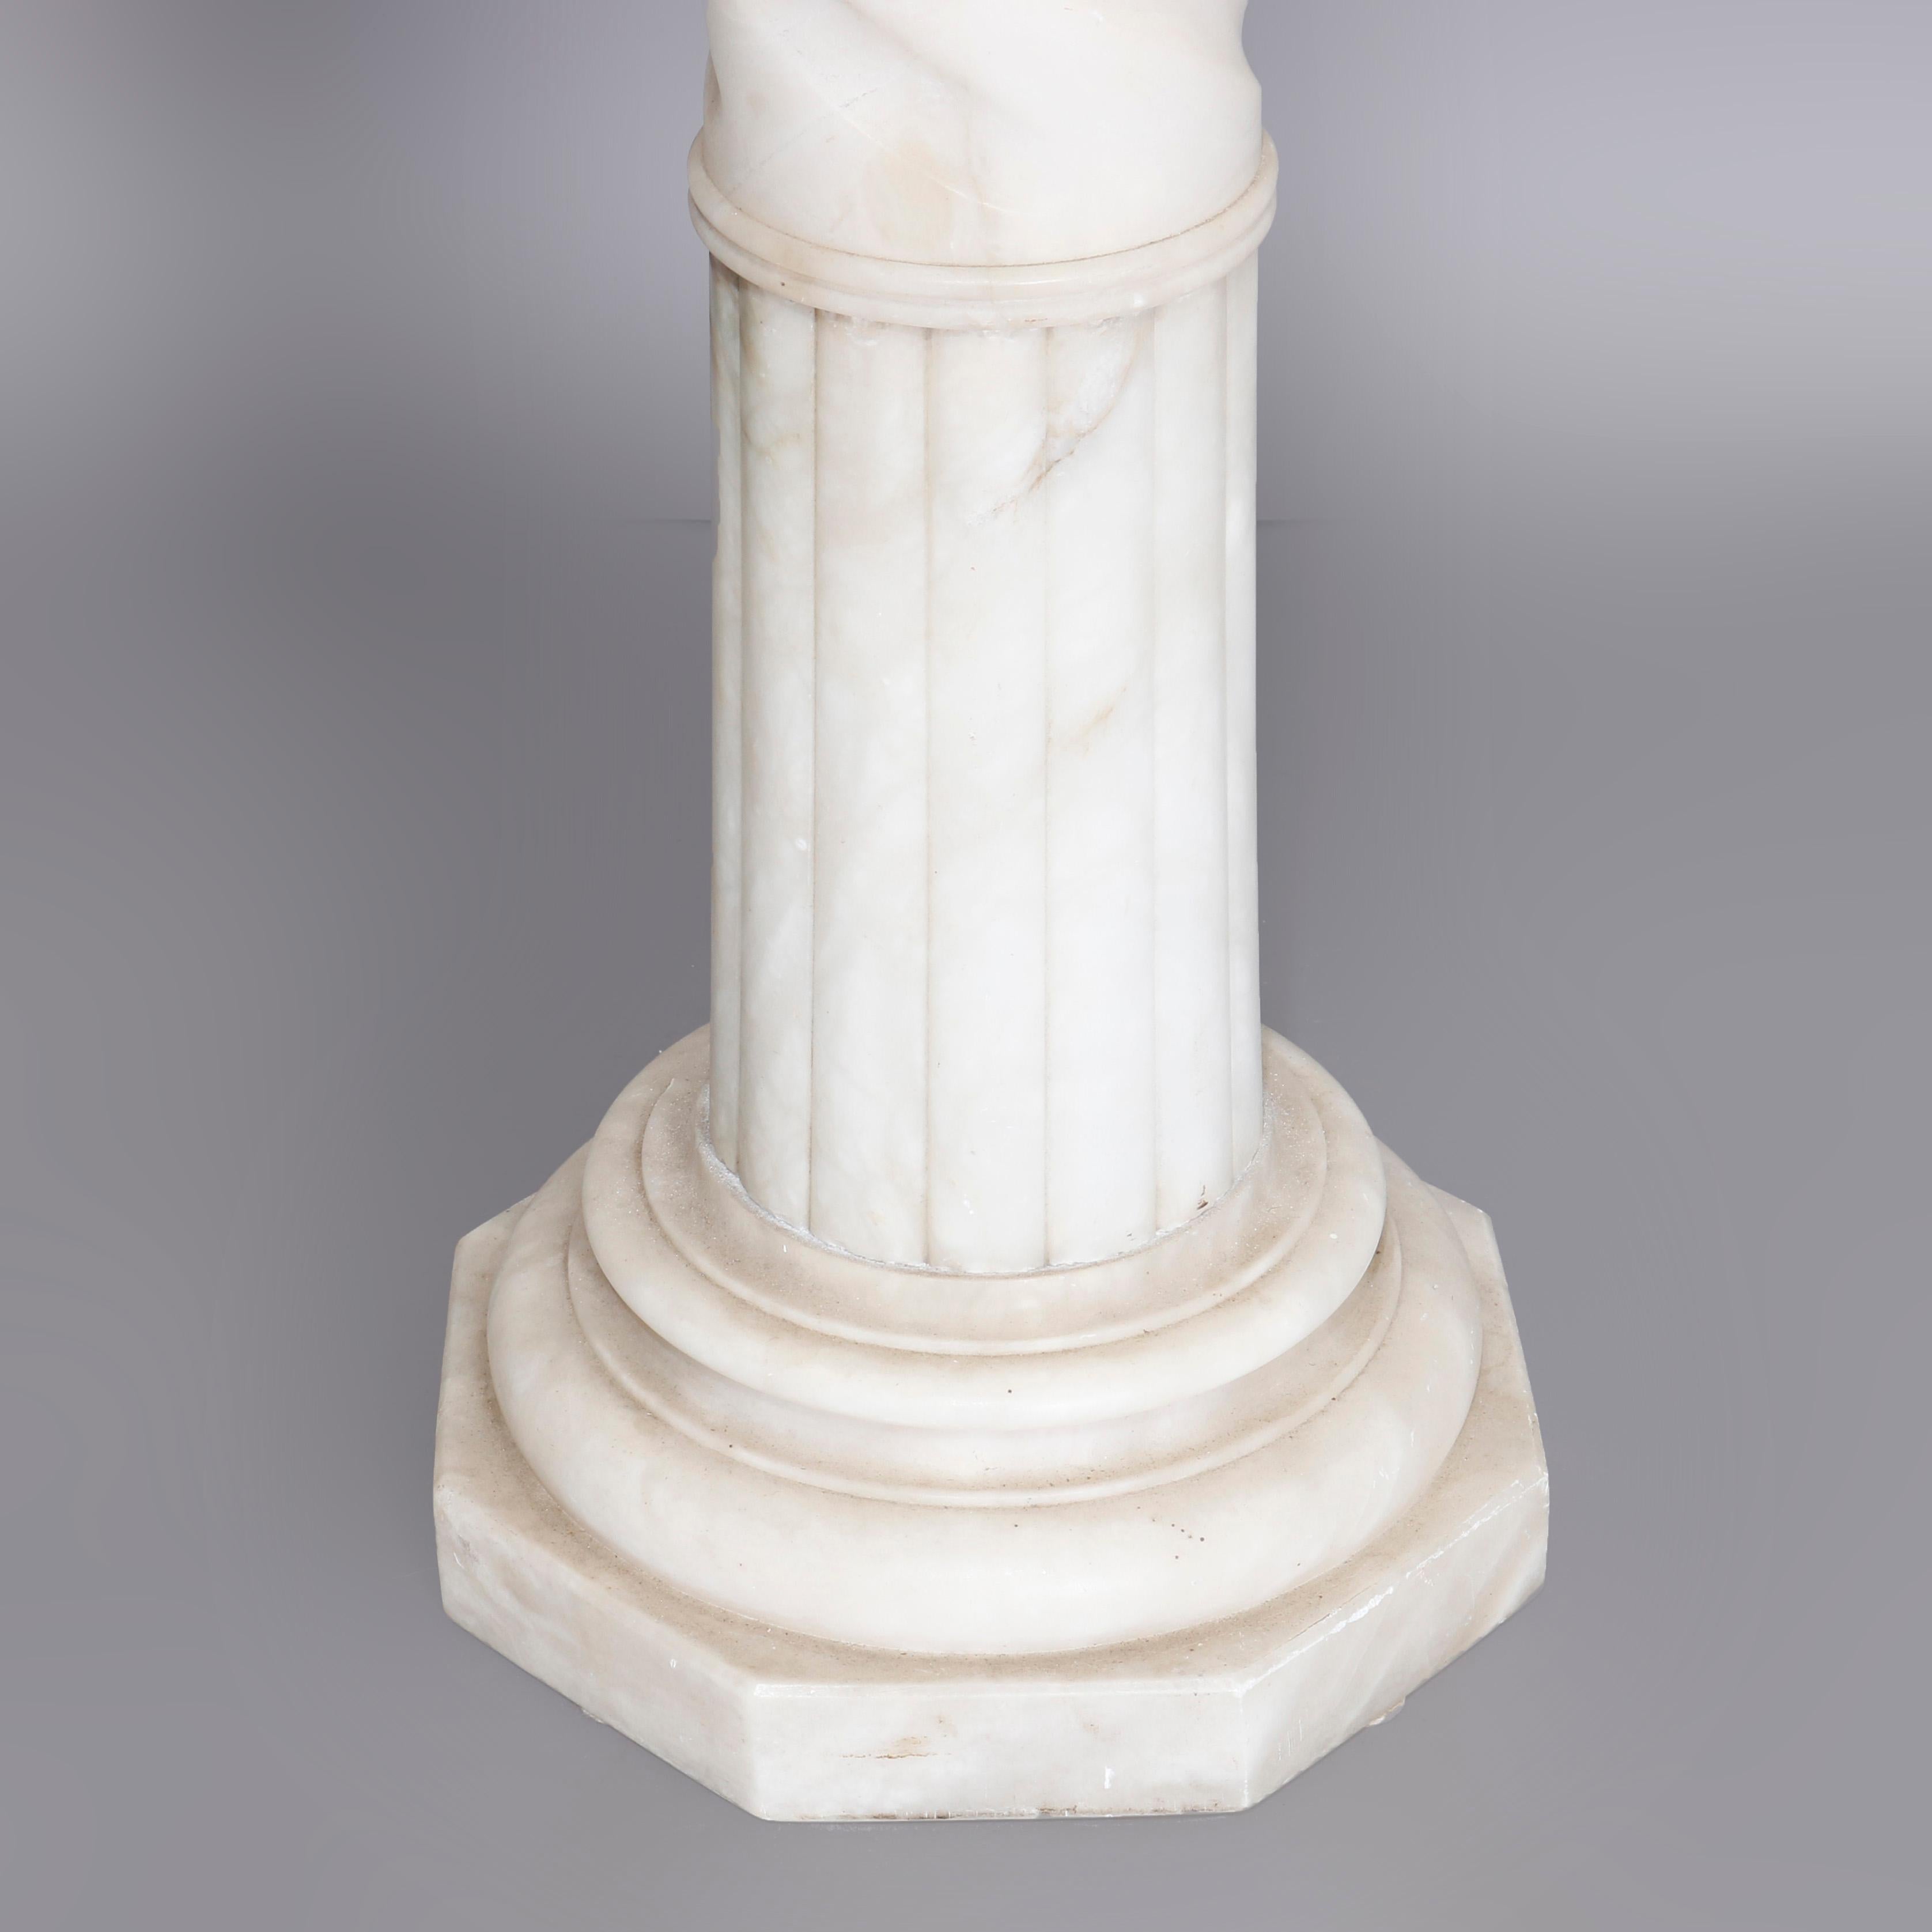 European Antique Carved Italian Marble Neo Classical Sculpture Display Stand, circa 1900